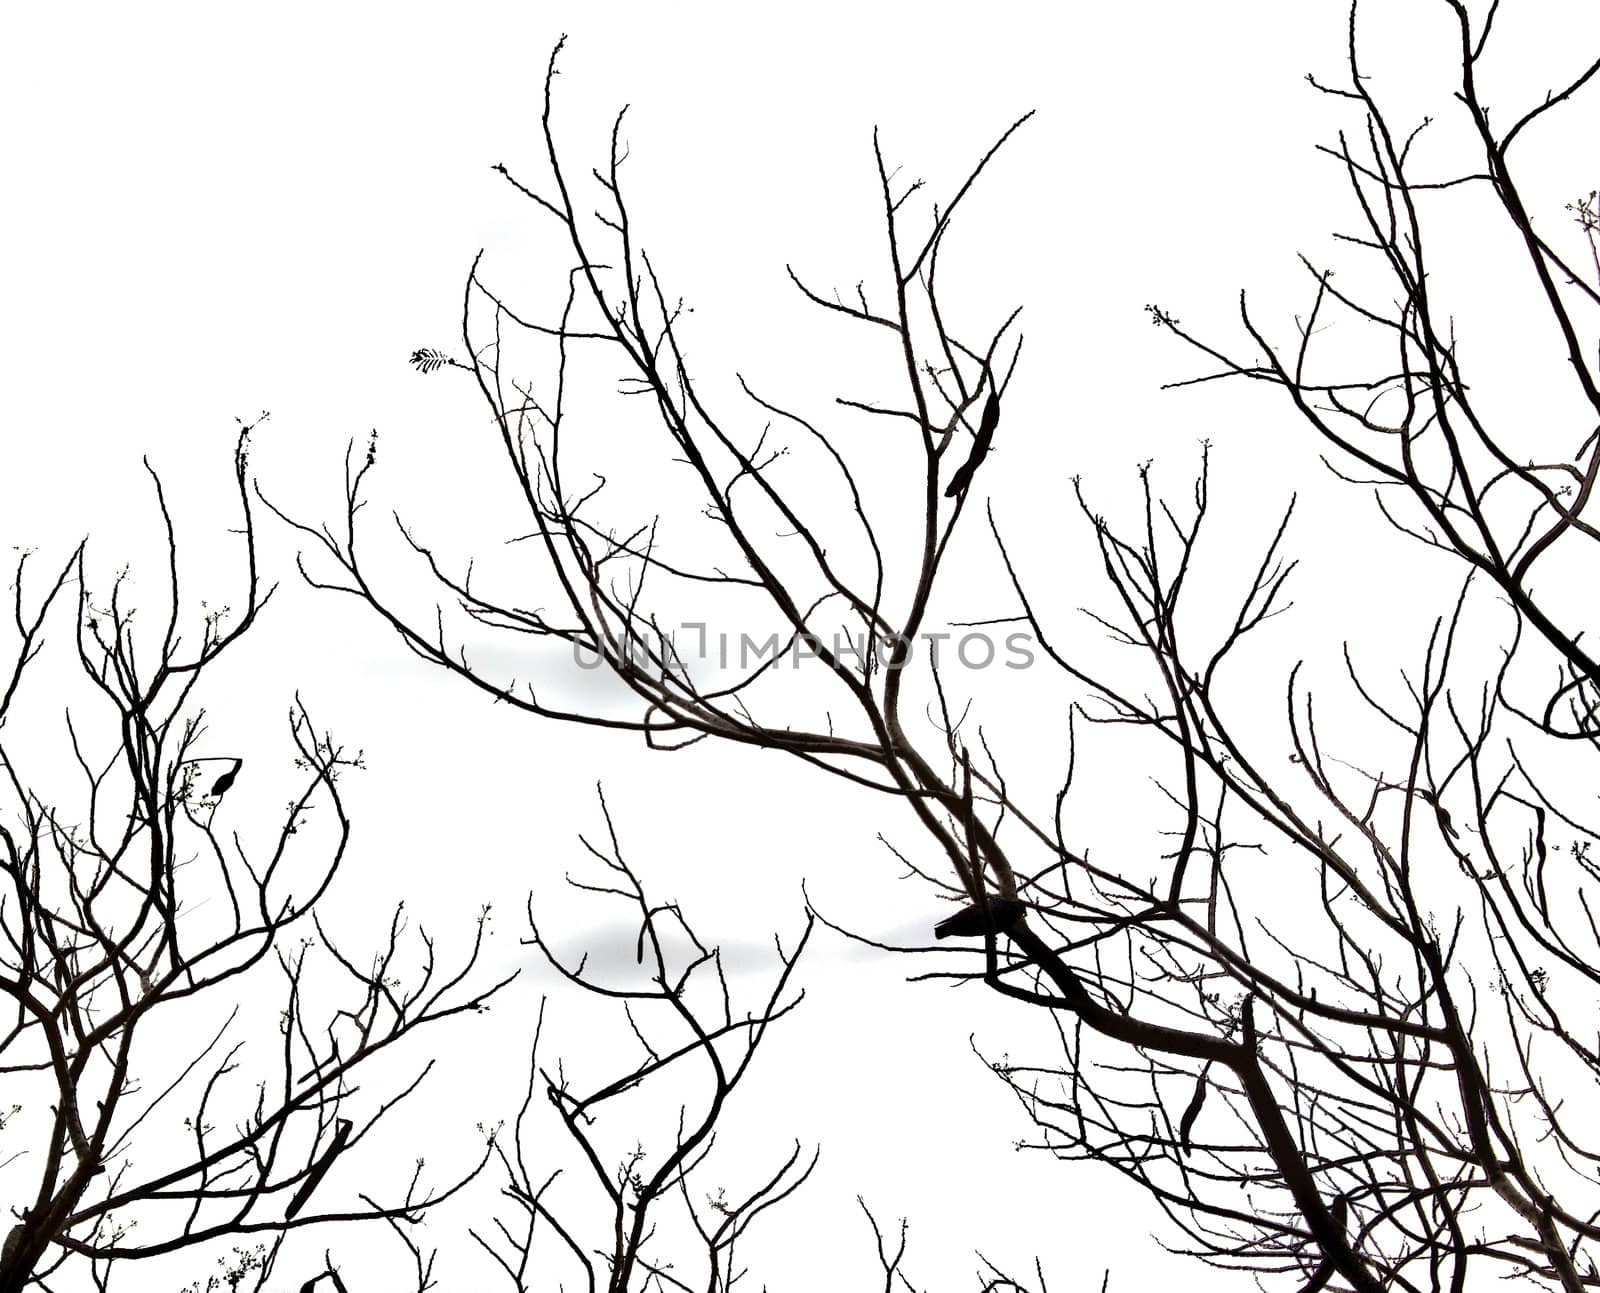 Leafless tree branches abstract background. Black and white by wasan_gredpree